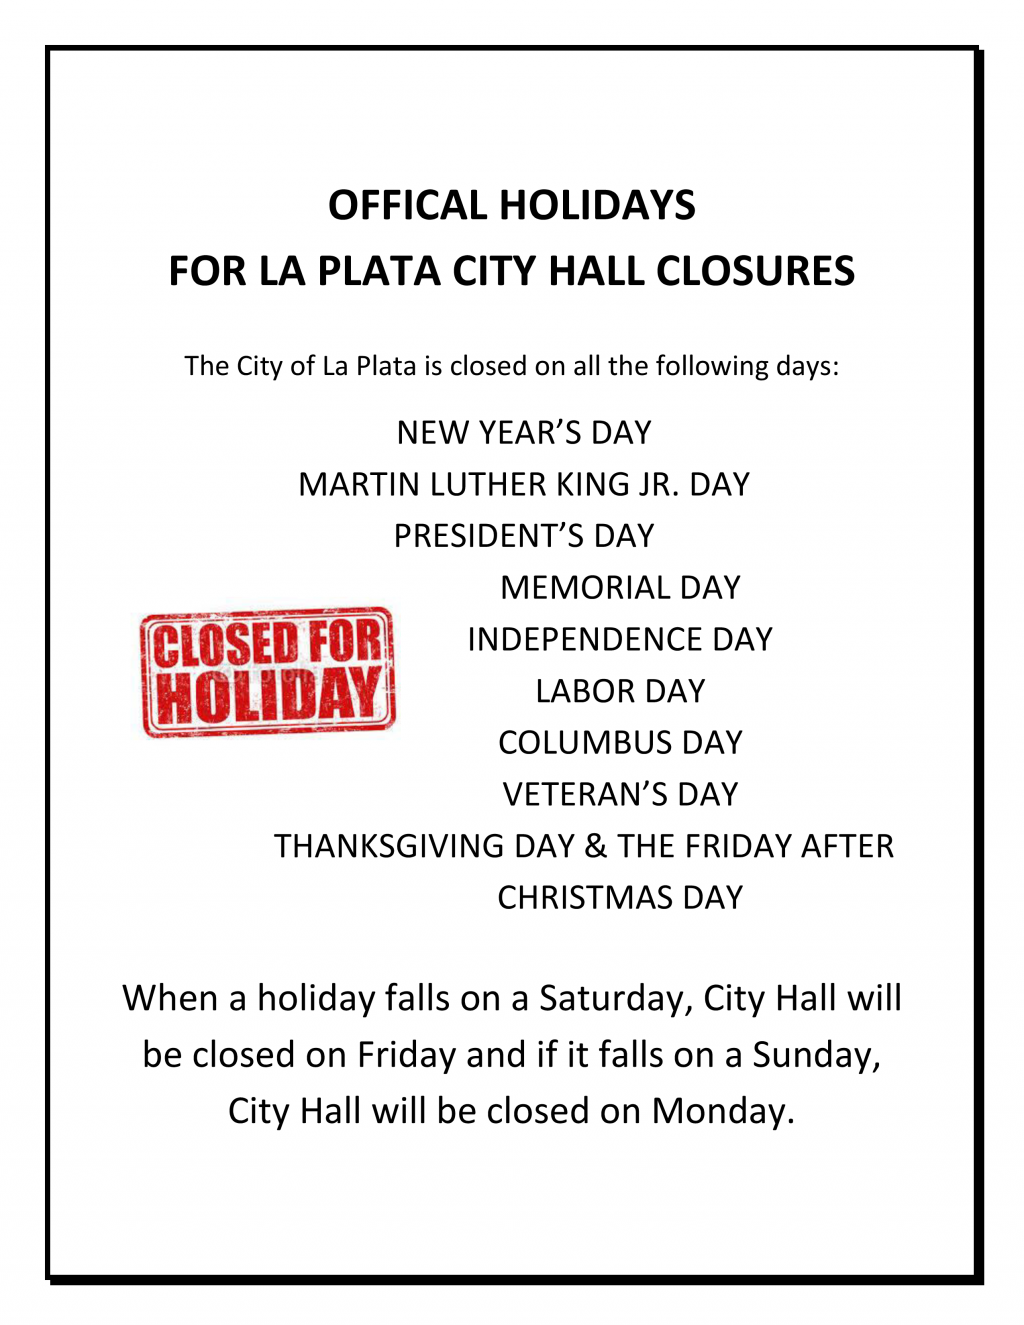 image-760525-SCHEDULE_FOR_CITY_HALL_CLOSINGS_(1).w640.png